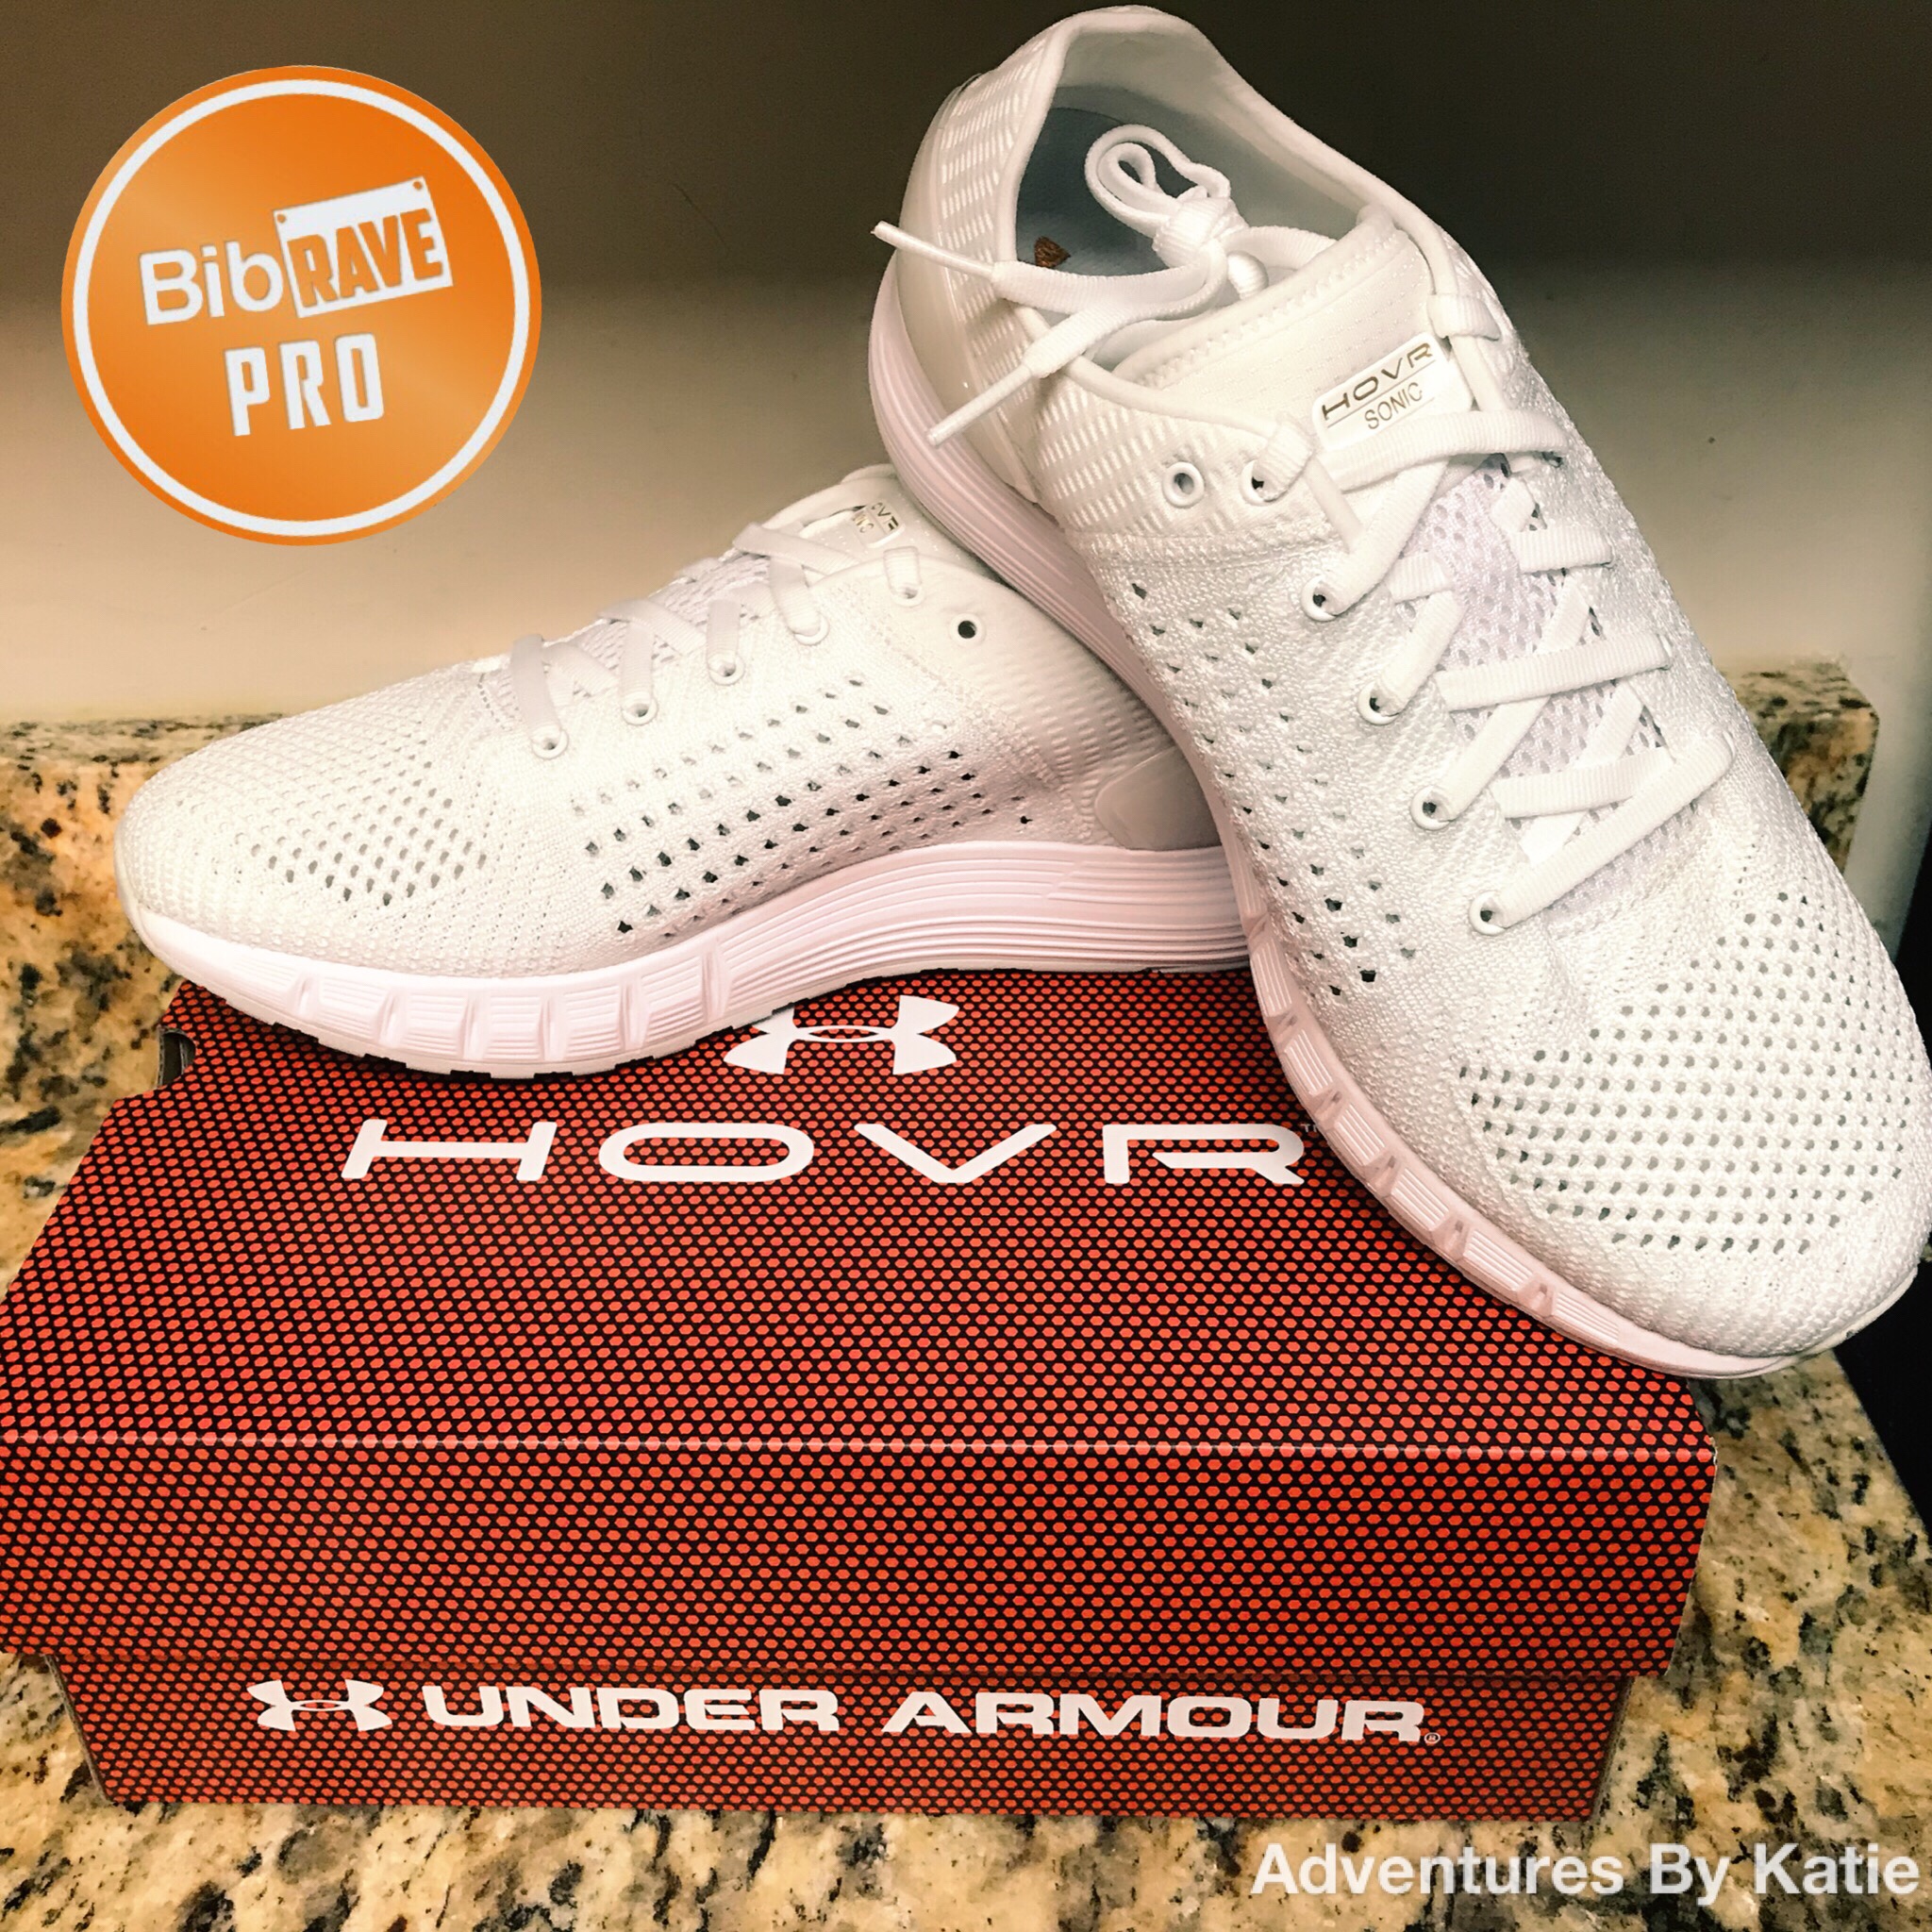 Armour HOVR Sonic Shoes | A BibRavePro Review By Katie